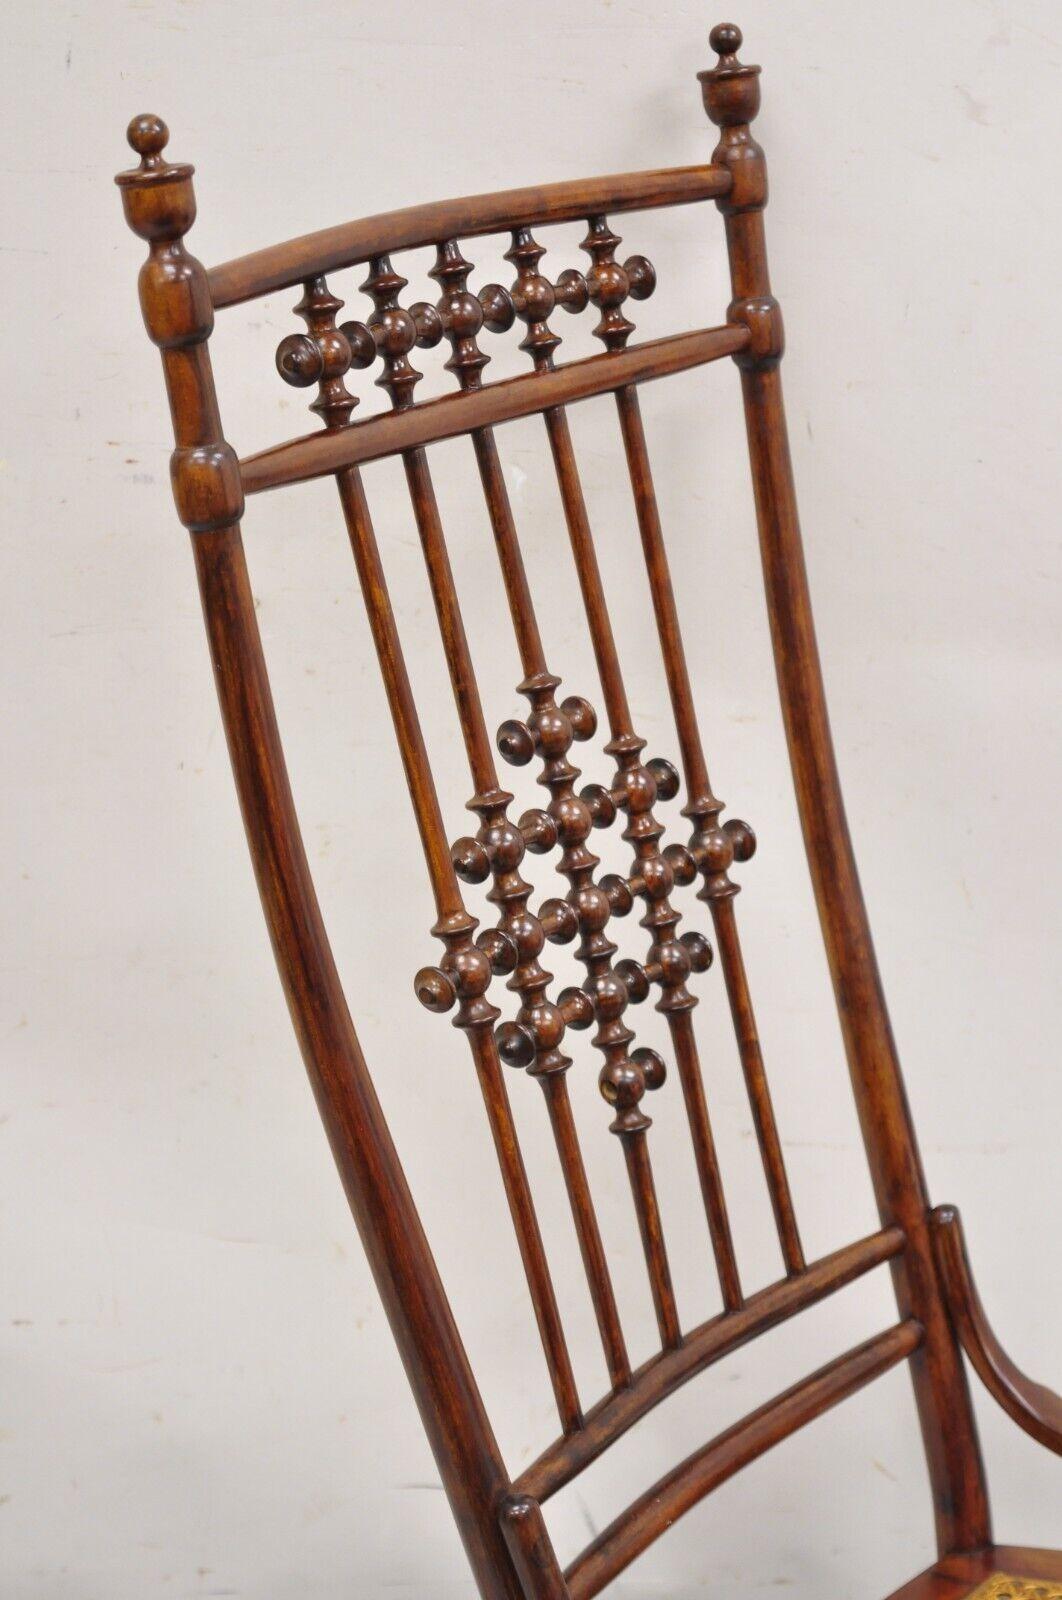 19th Century Victorian Aesthetic Movement Chestnut Stick & Ball Spindle Rocker Rocking Chair For Sale